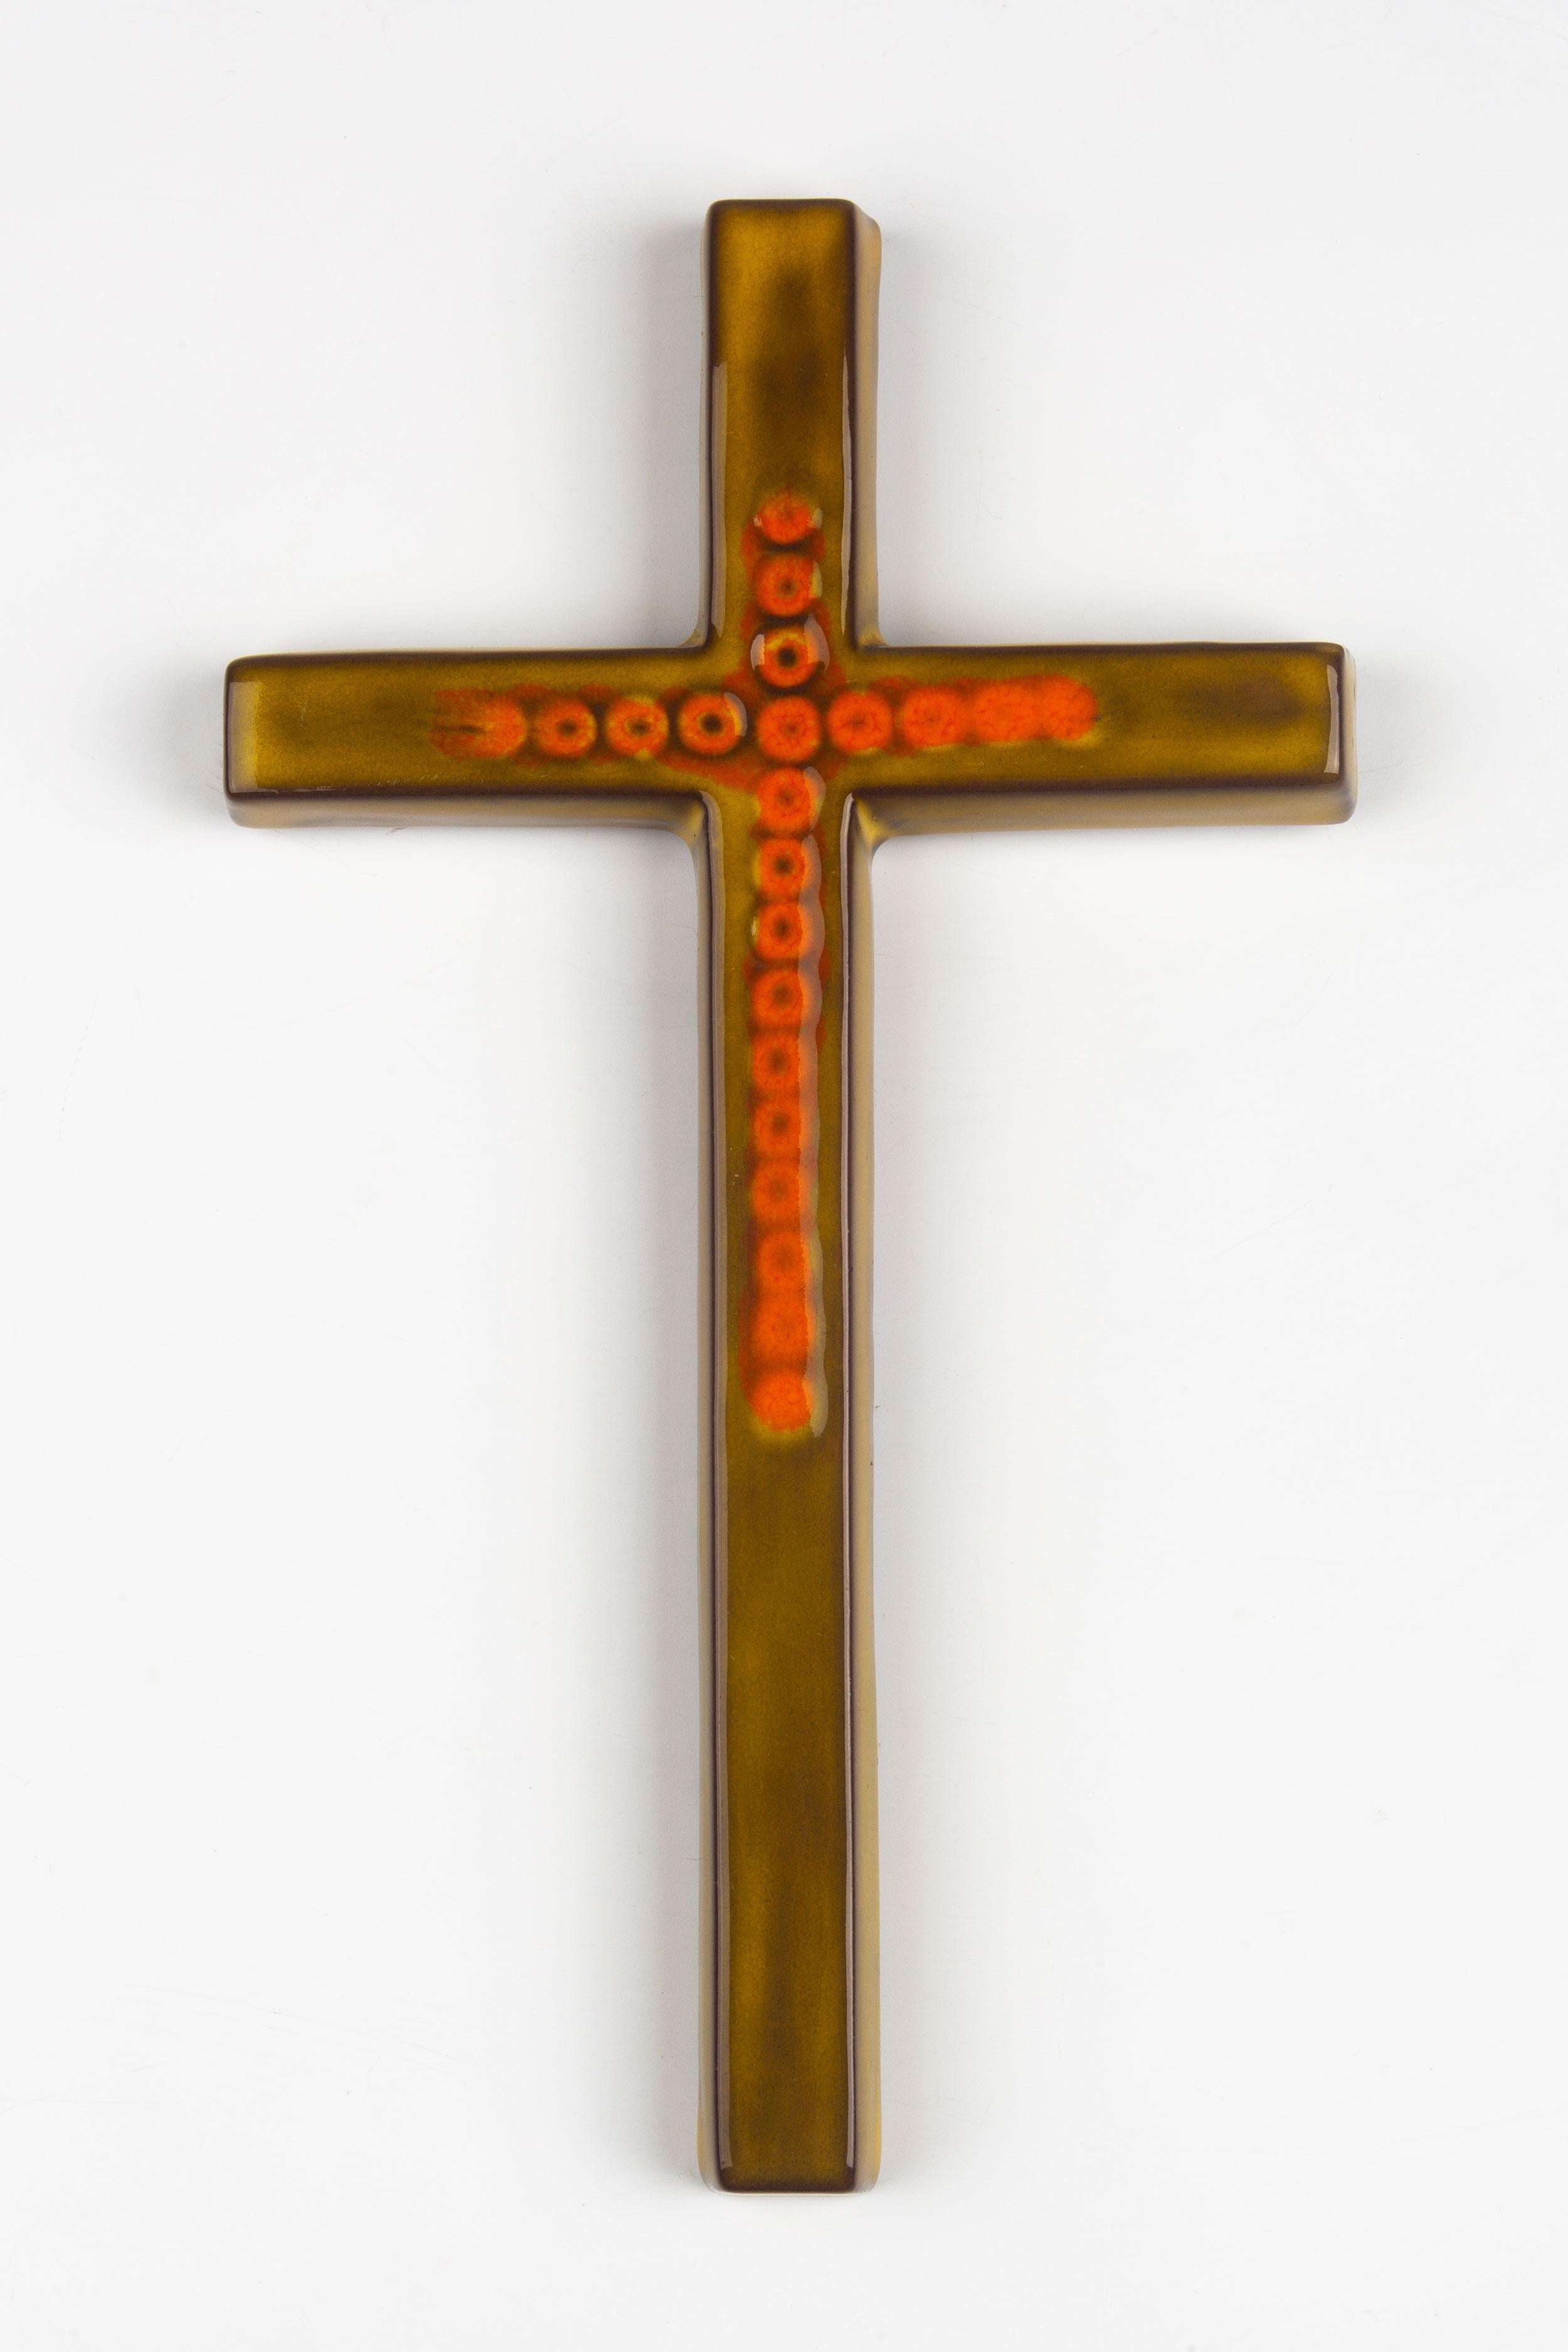 Midcentury European ceramic wall crucifix in green and orange from a large collection of crosses handmade by Flemish artisans. High gloss glaze over olive green cross with decorative orange hand painted design. 

From modernism to brutalism, the